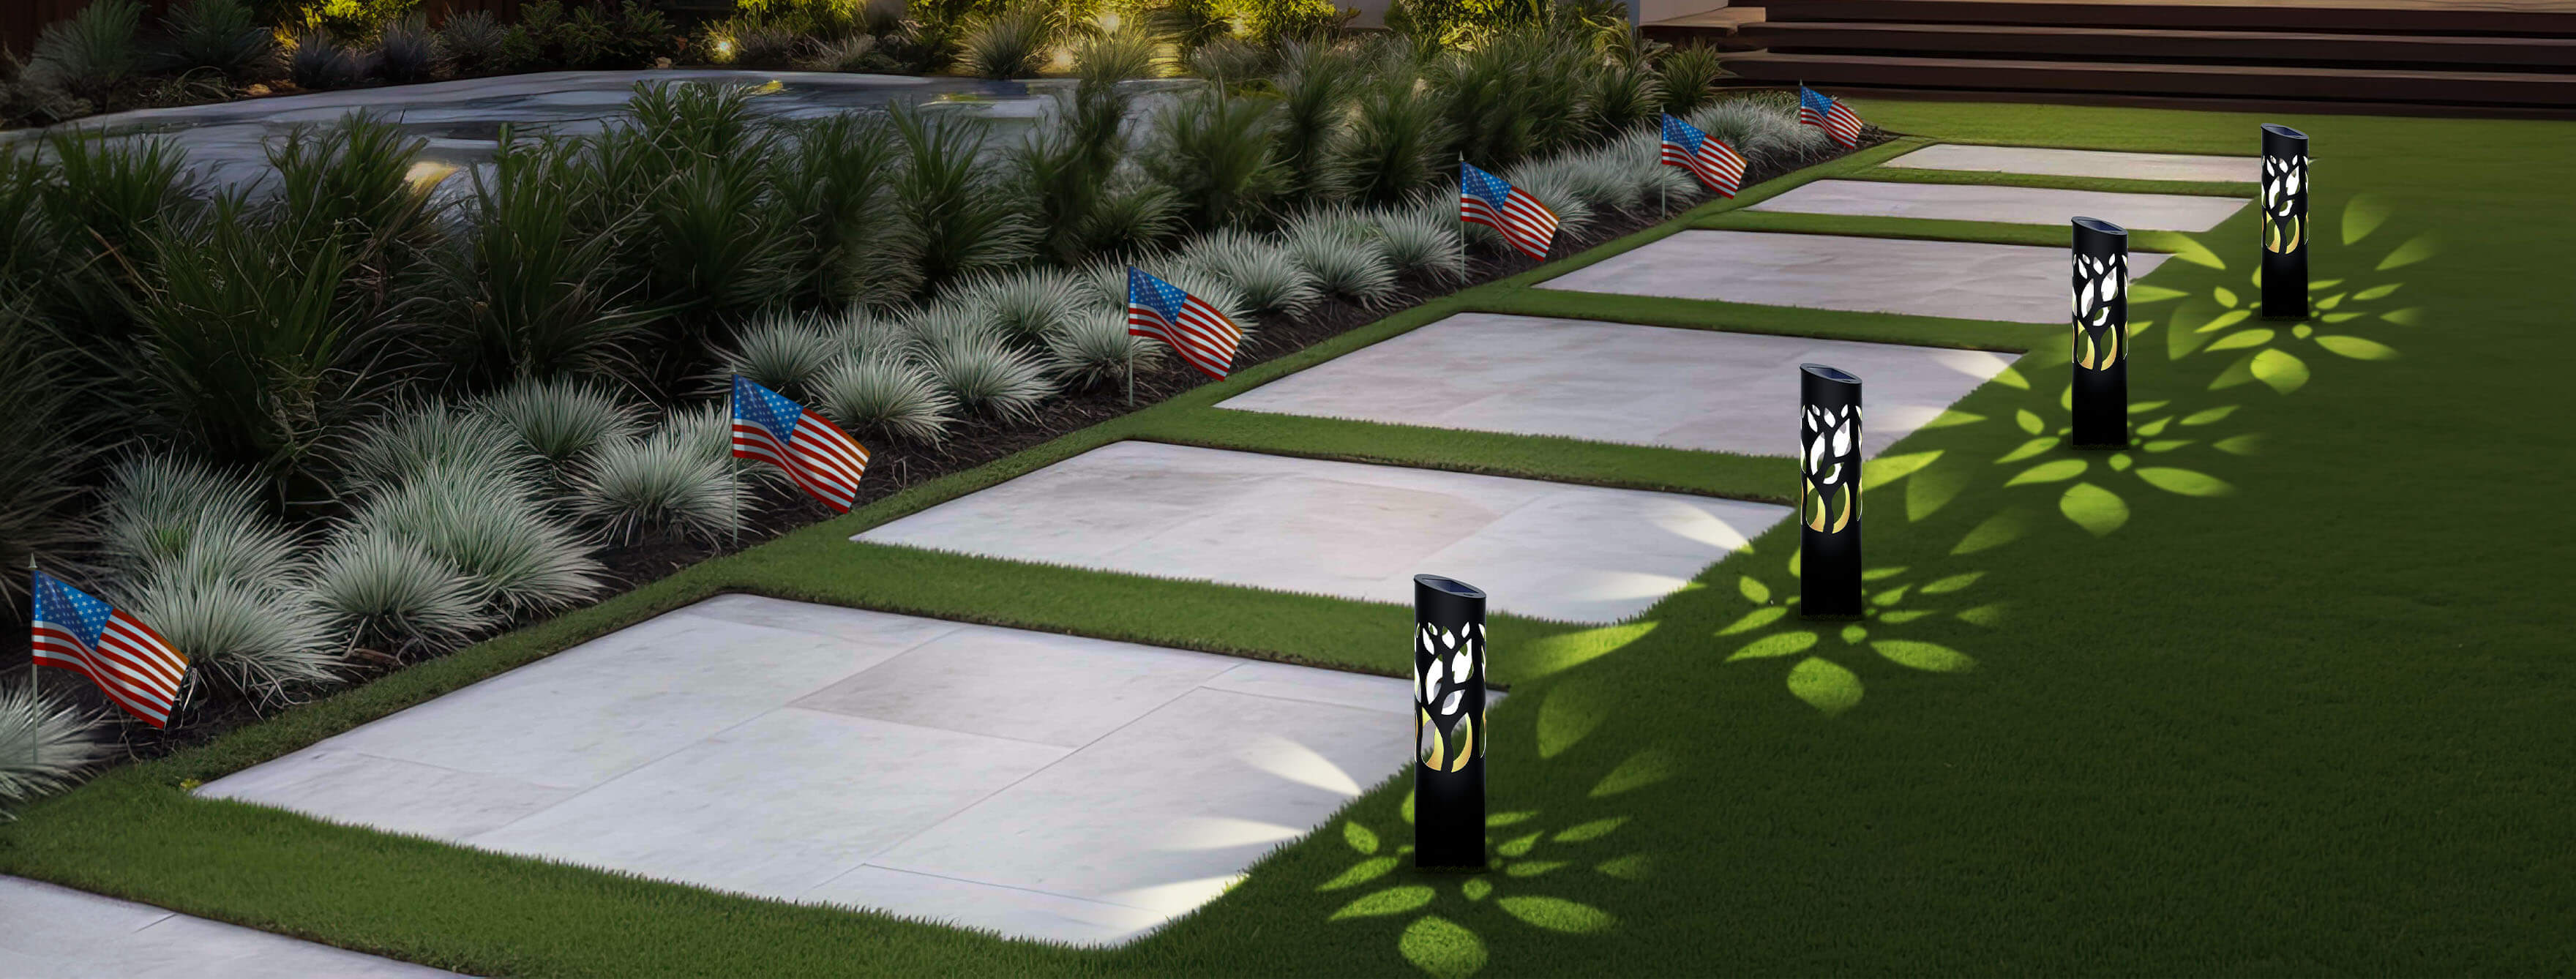 Celebrate a Sustainable 4th of July with Solar Lighting